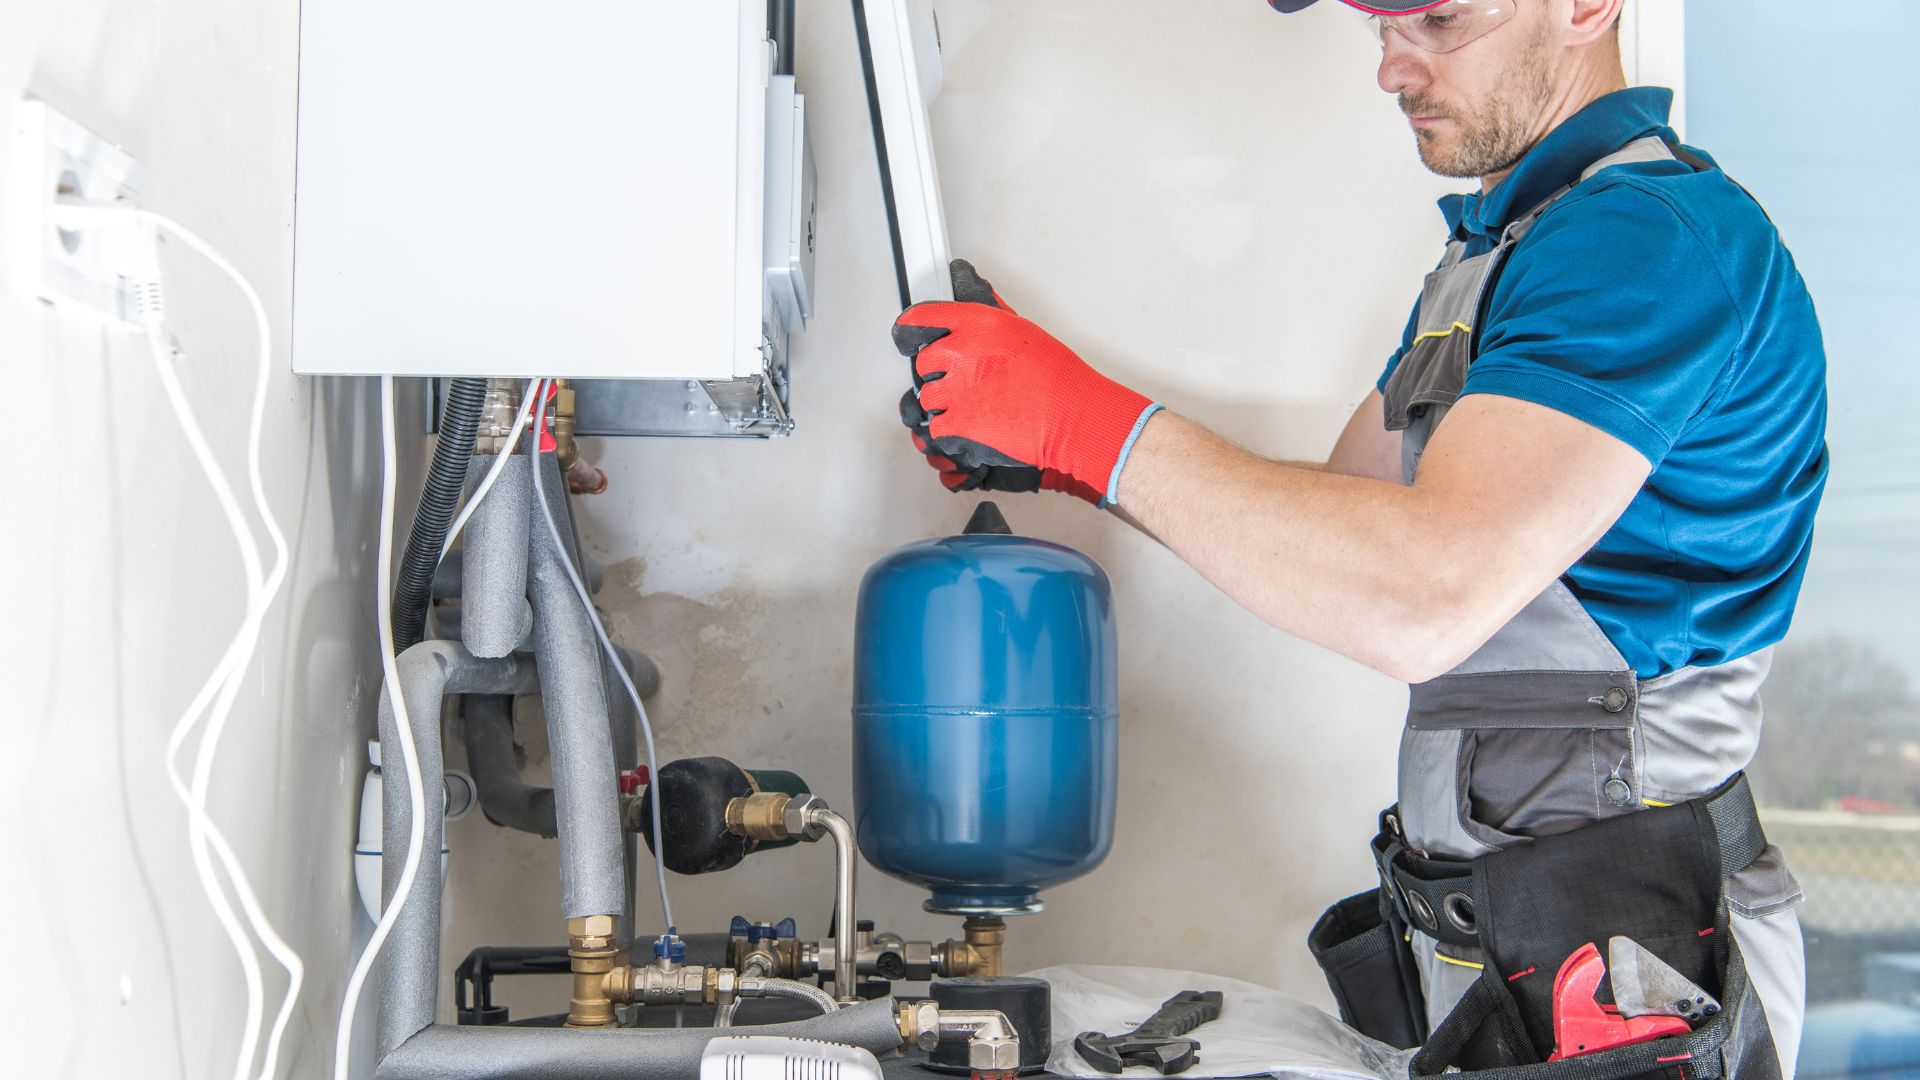 Factors to Evaluate Before Installing a Water Heater, According to Expert Plumbers